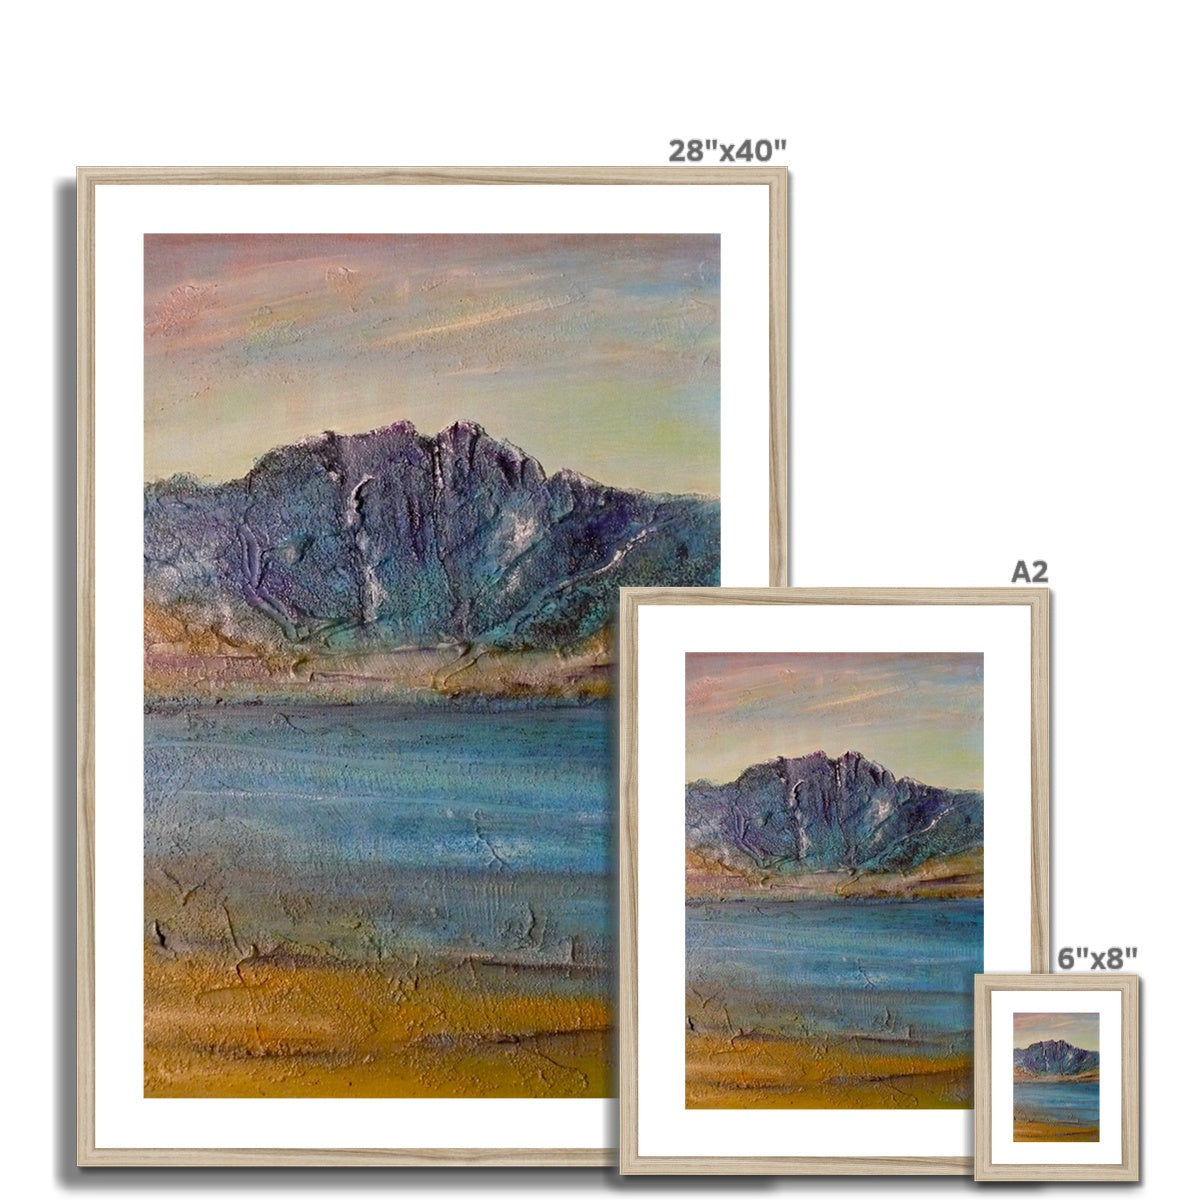 Torridon Painting | Framed & Mounted Prints From Scotland-Framed & Mounted Prints-Scottish Lochs & Mountains Art Gallery-Paintings, Prints, Homeware, Art Gifts From Scotland By Scottish Artist Kevin Hunter